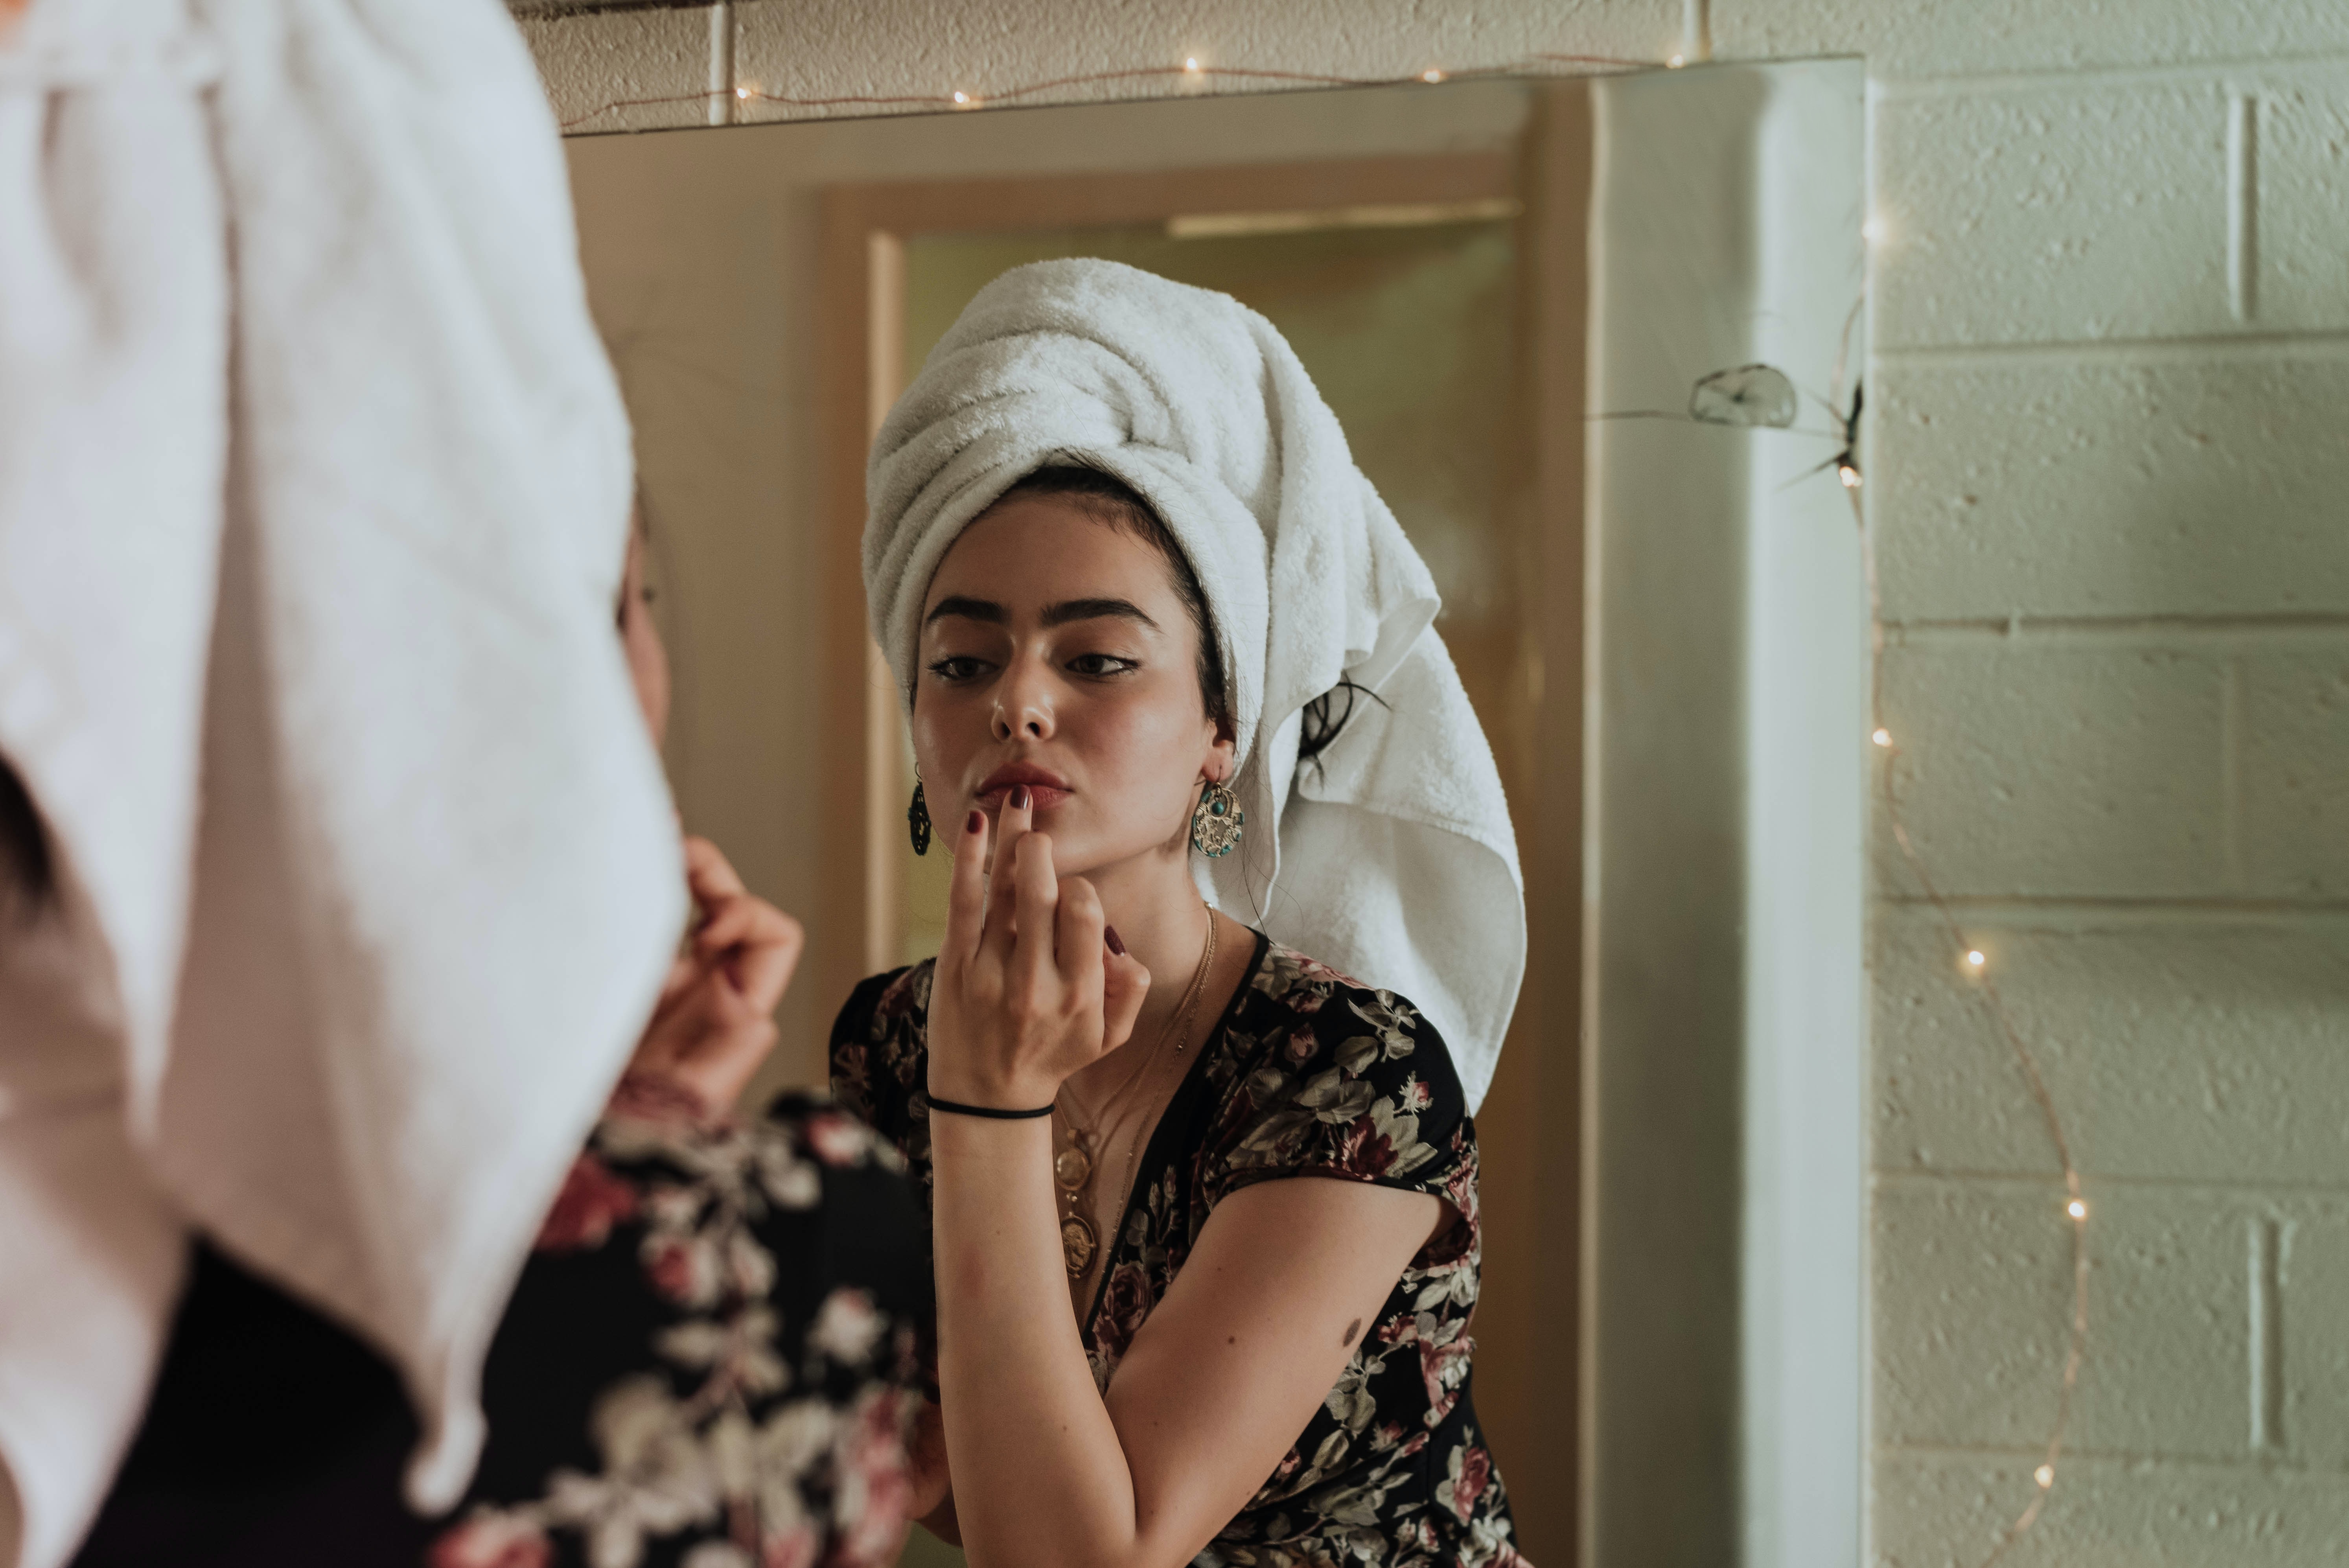 Woman putting on makeup after shower.